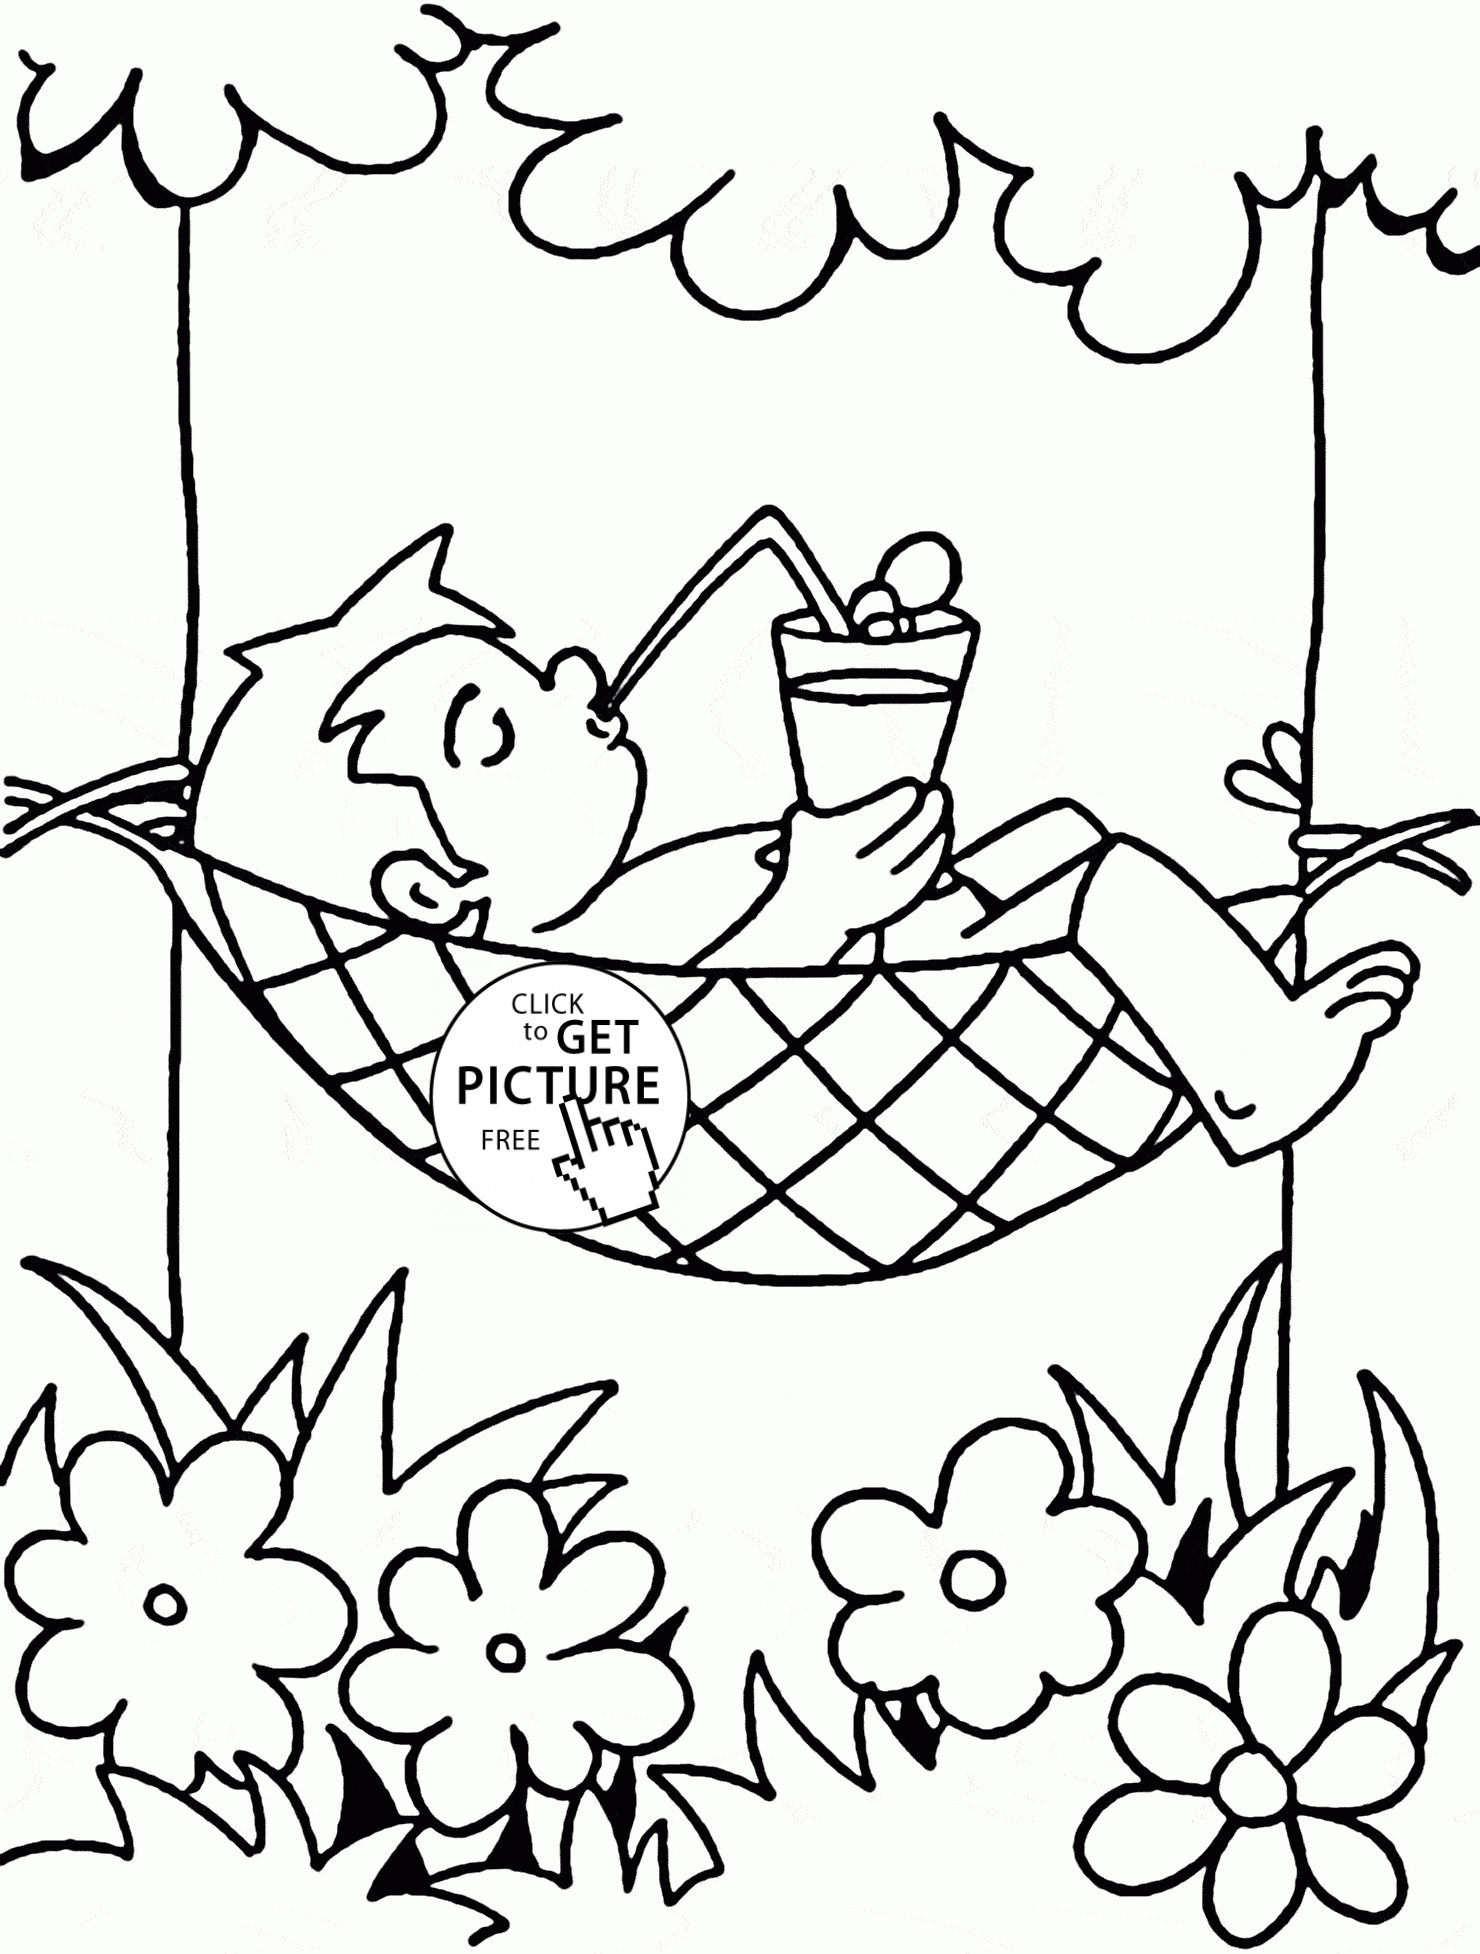 Daylight Savings Time Coloring Pages at GetColorings.com | Free ...